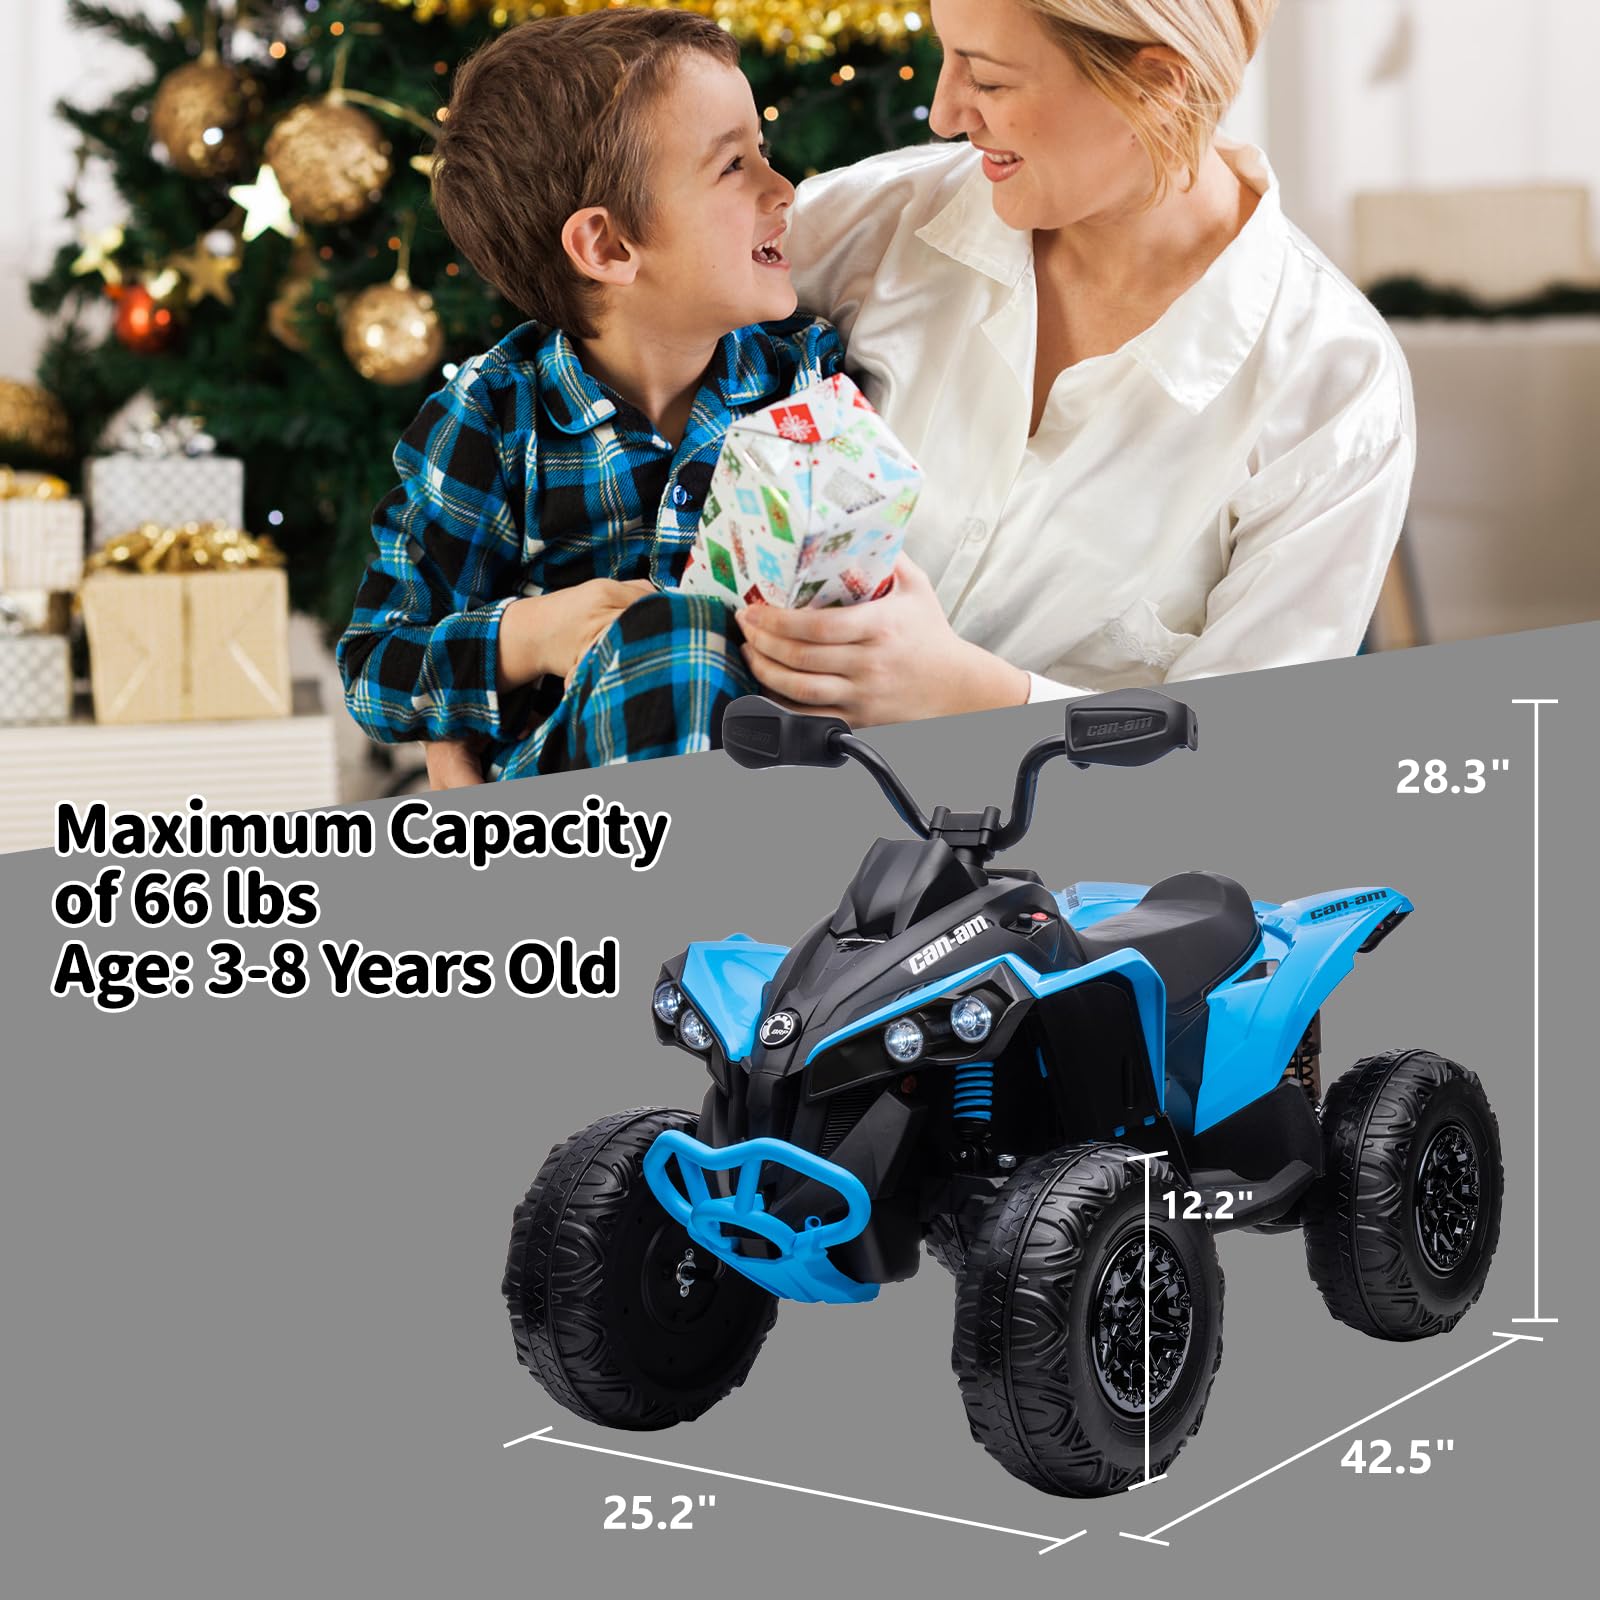 Kids ATV, 12V Ride on Toy Car Bombardier Licensed BRP Can-am 4 Wheeler Quad Electric Vehicle, w/LED Lights, Spring Suspension, Bluetooth, Music, USB, Treaded Tires, White